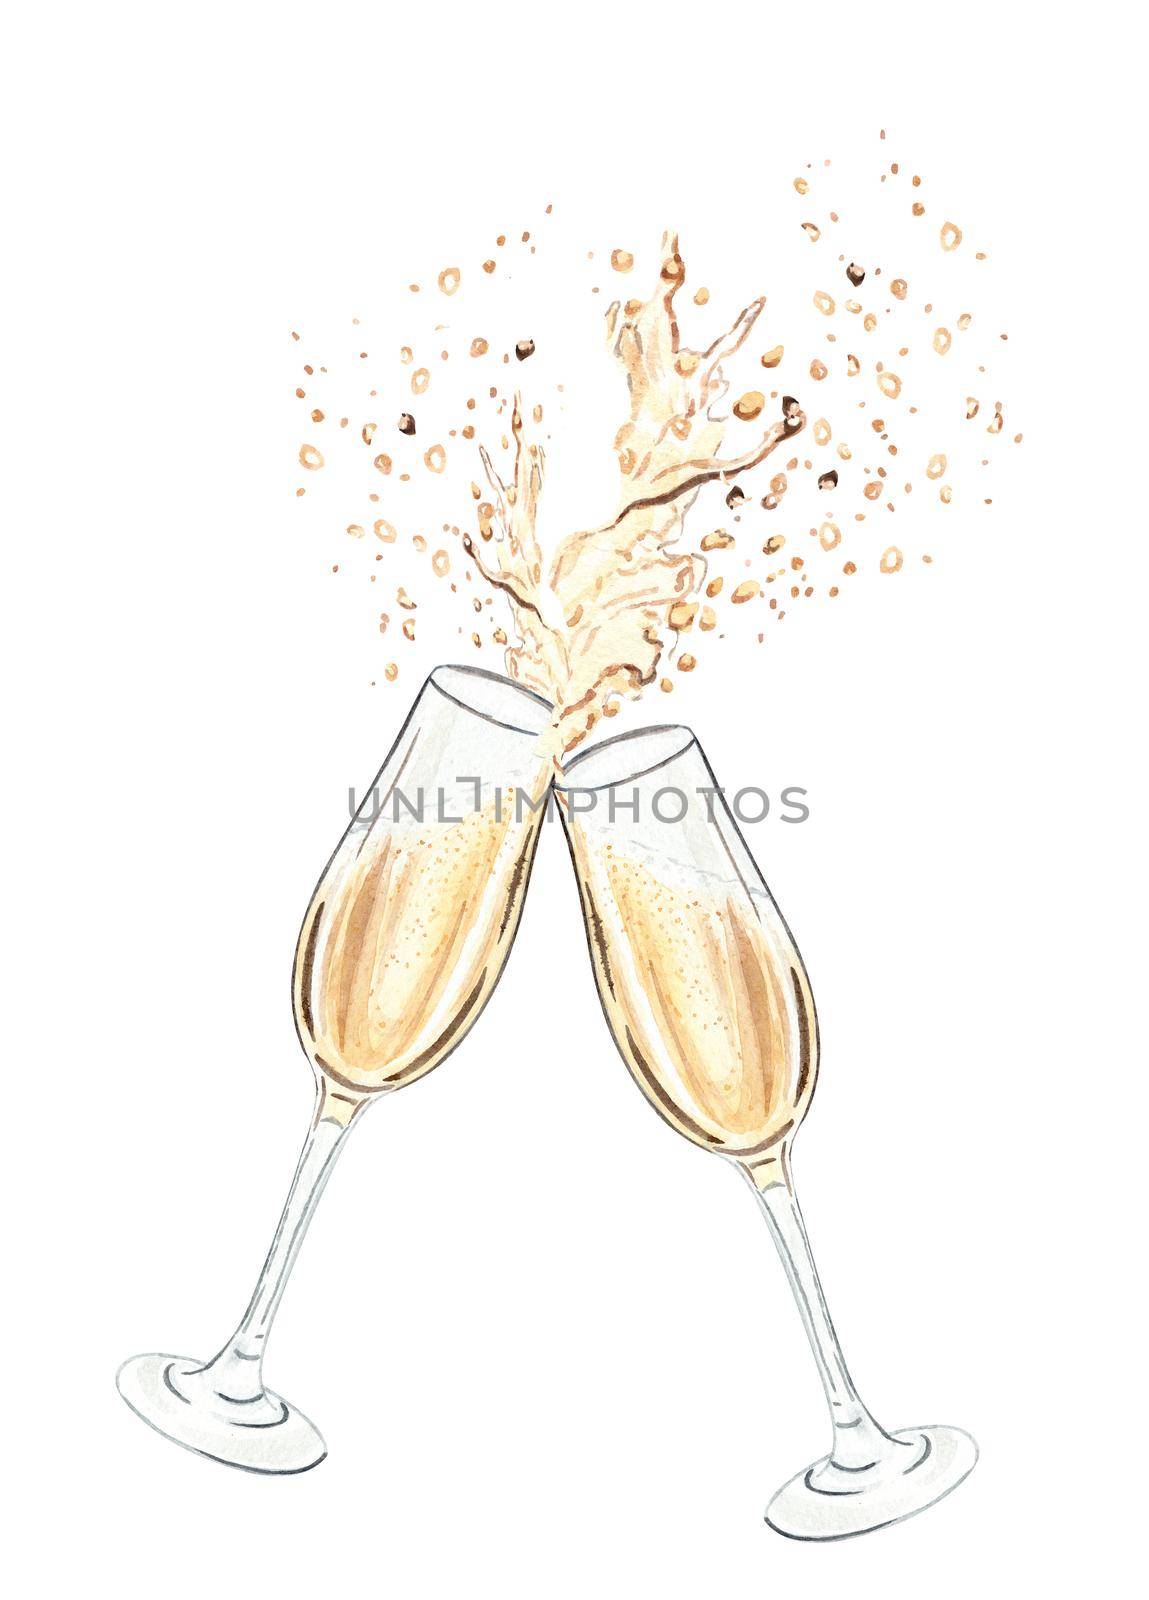 Watercolor champagne glasses splashing isolated on white background. Sparkling white wine glasses hand drawn illustration. cheers